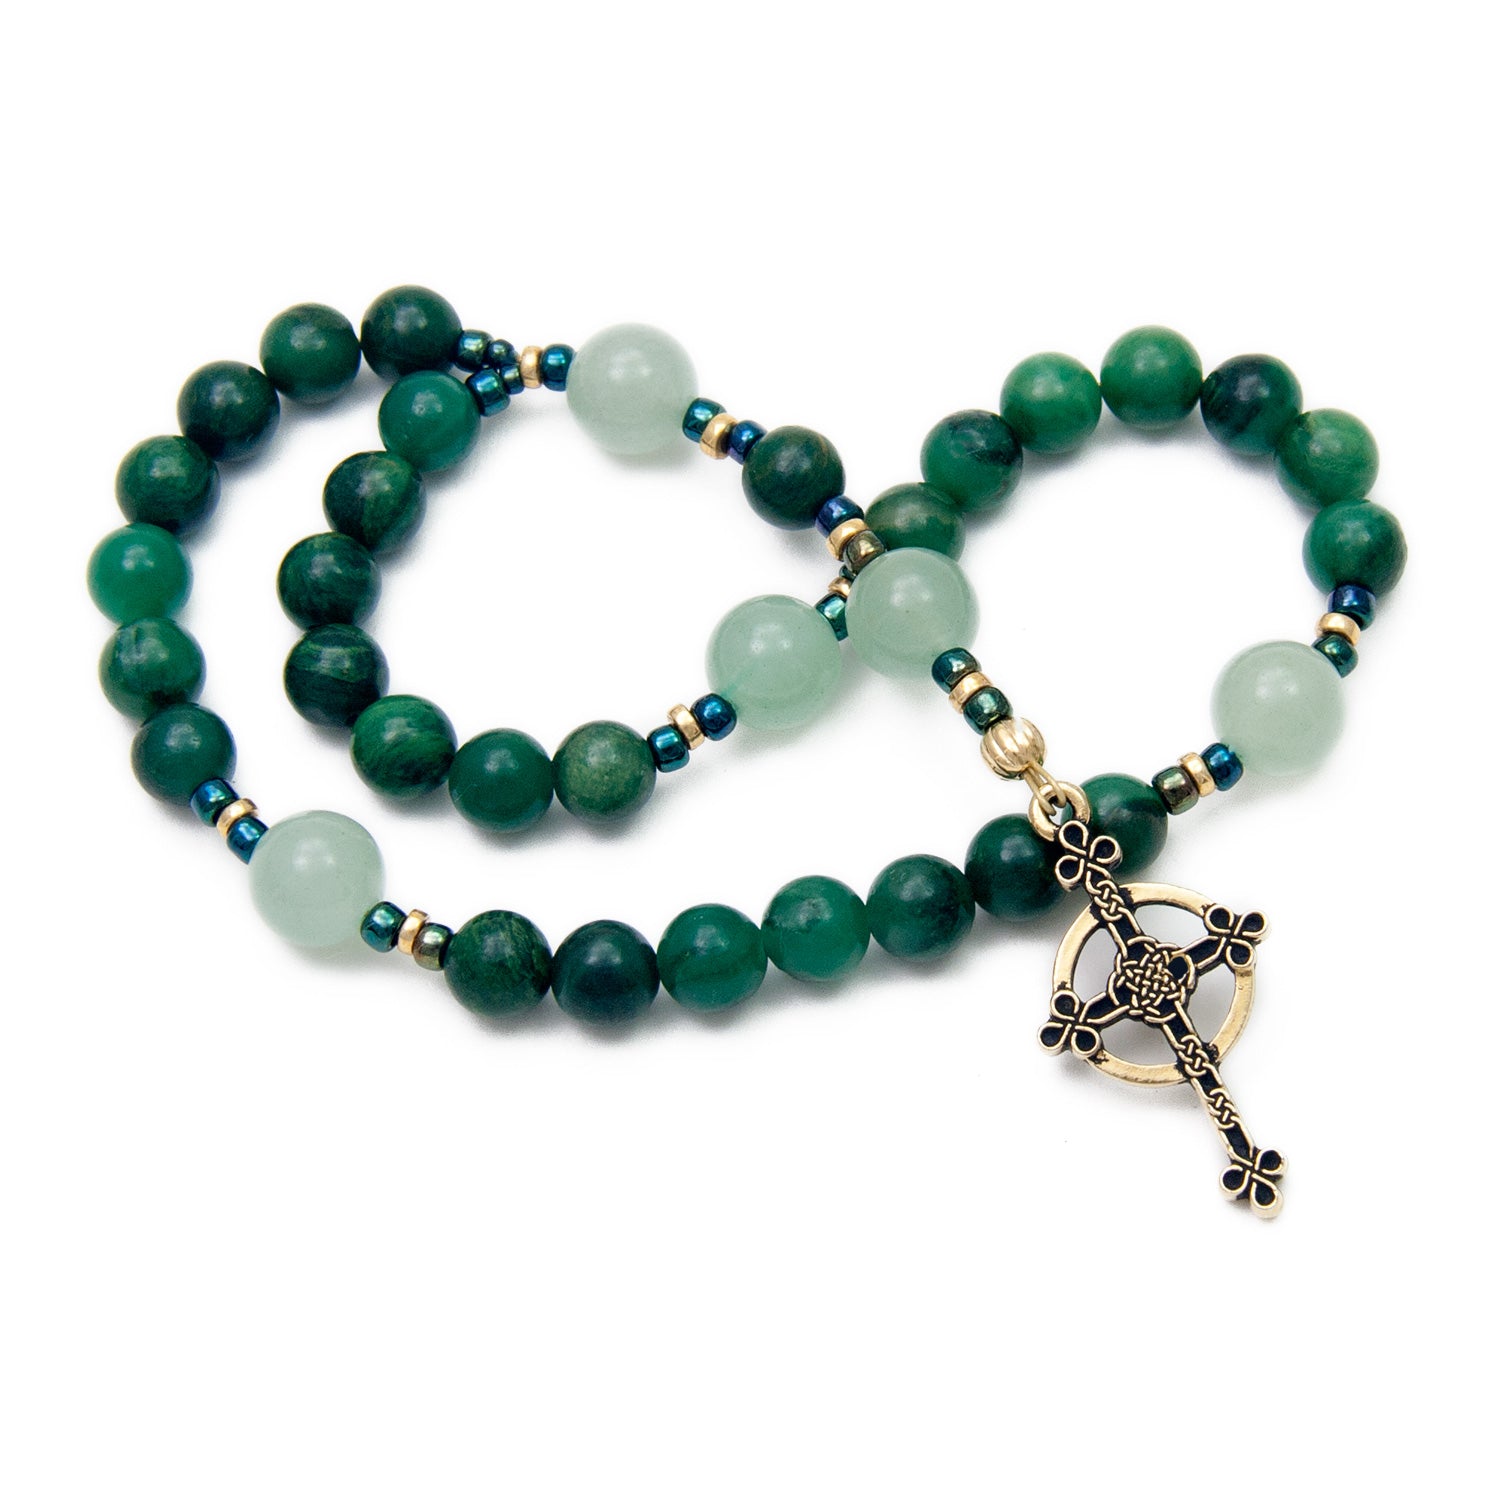 Anglican Prayer Beads: Should Anglicans Pray the Rosary?